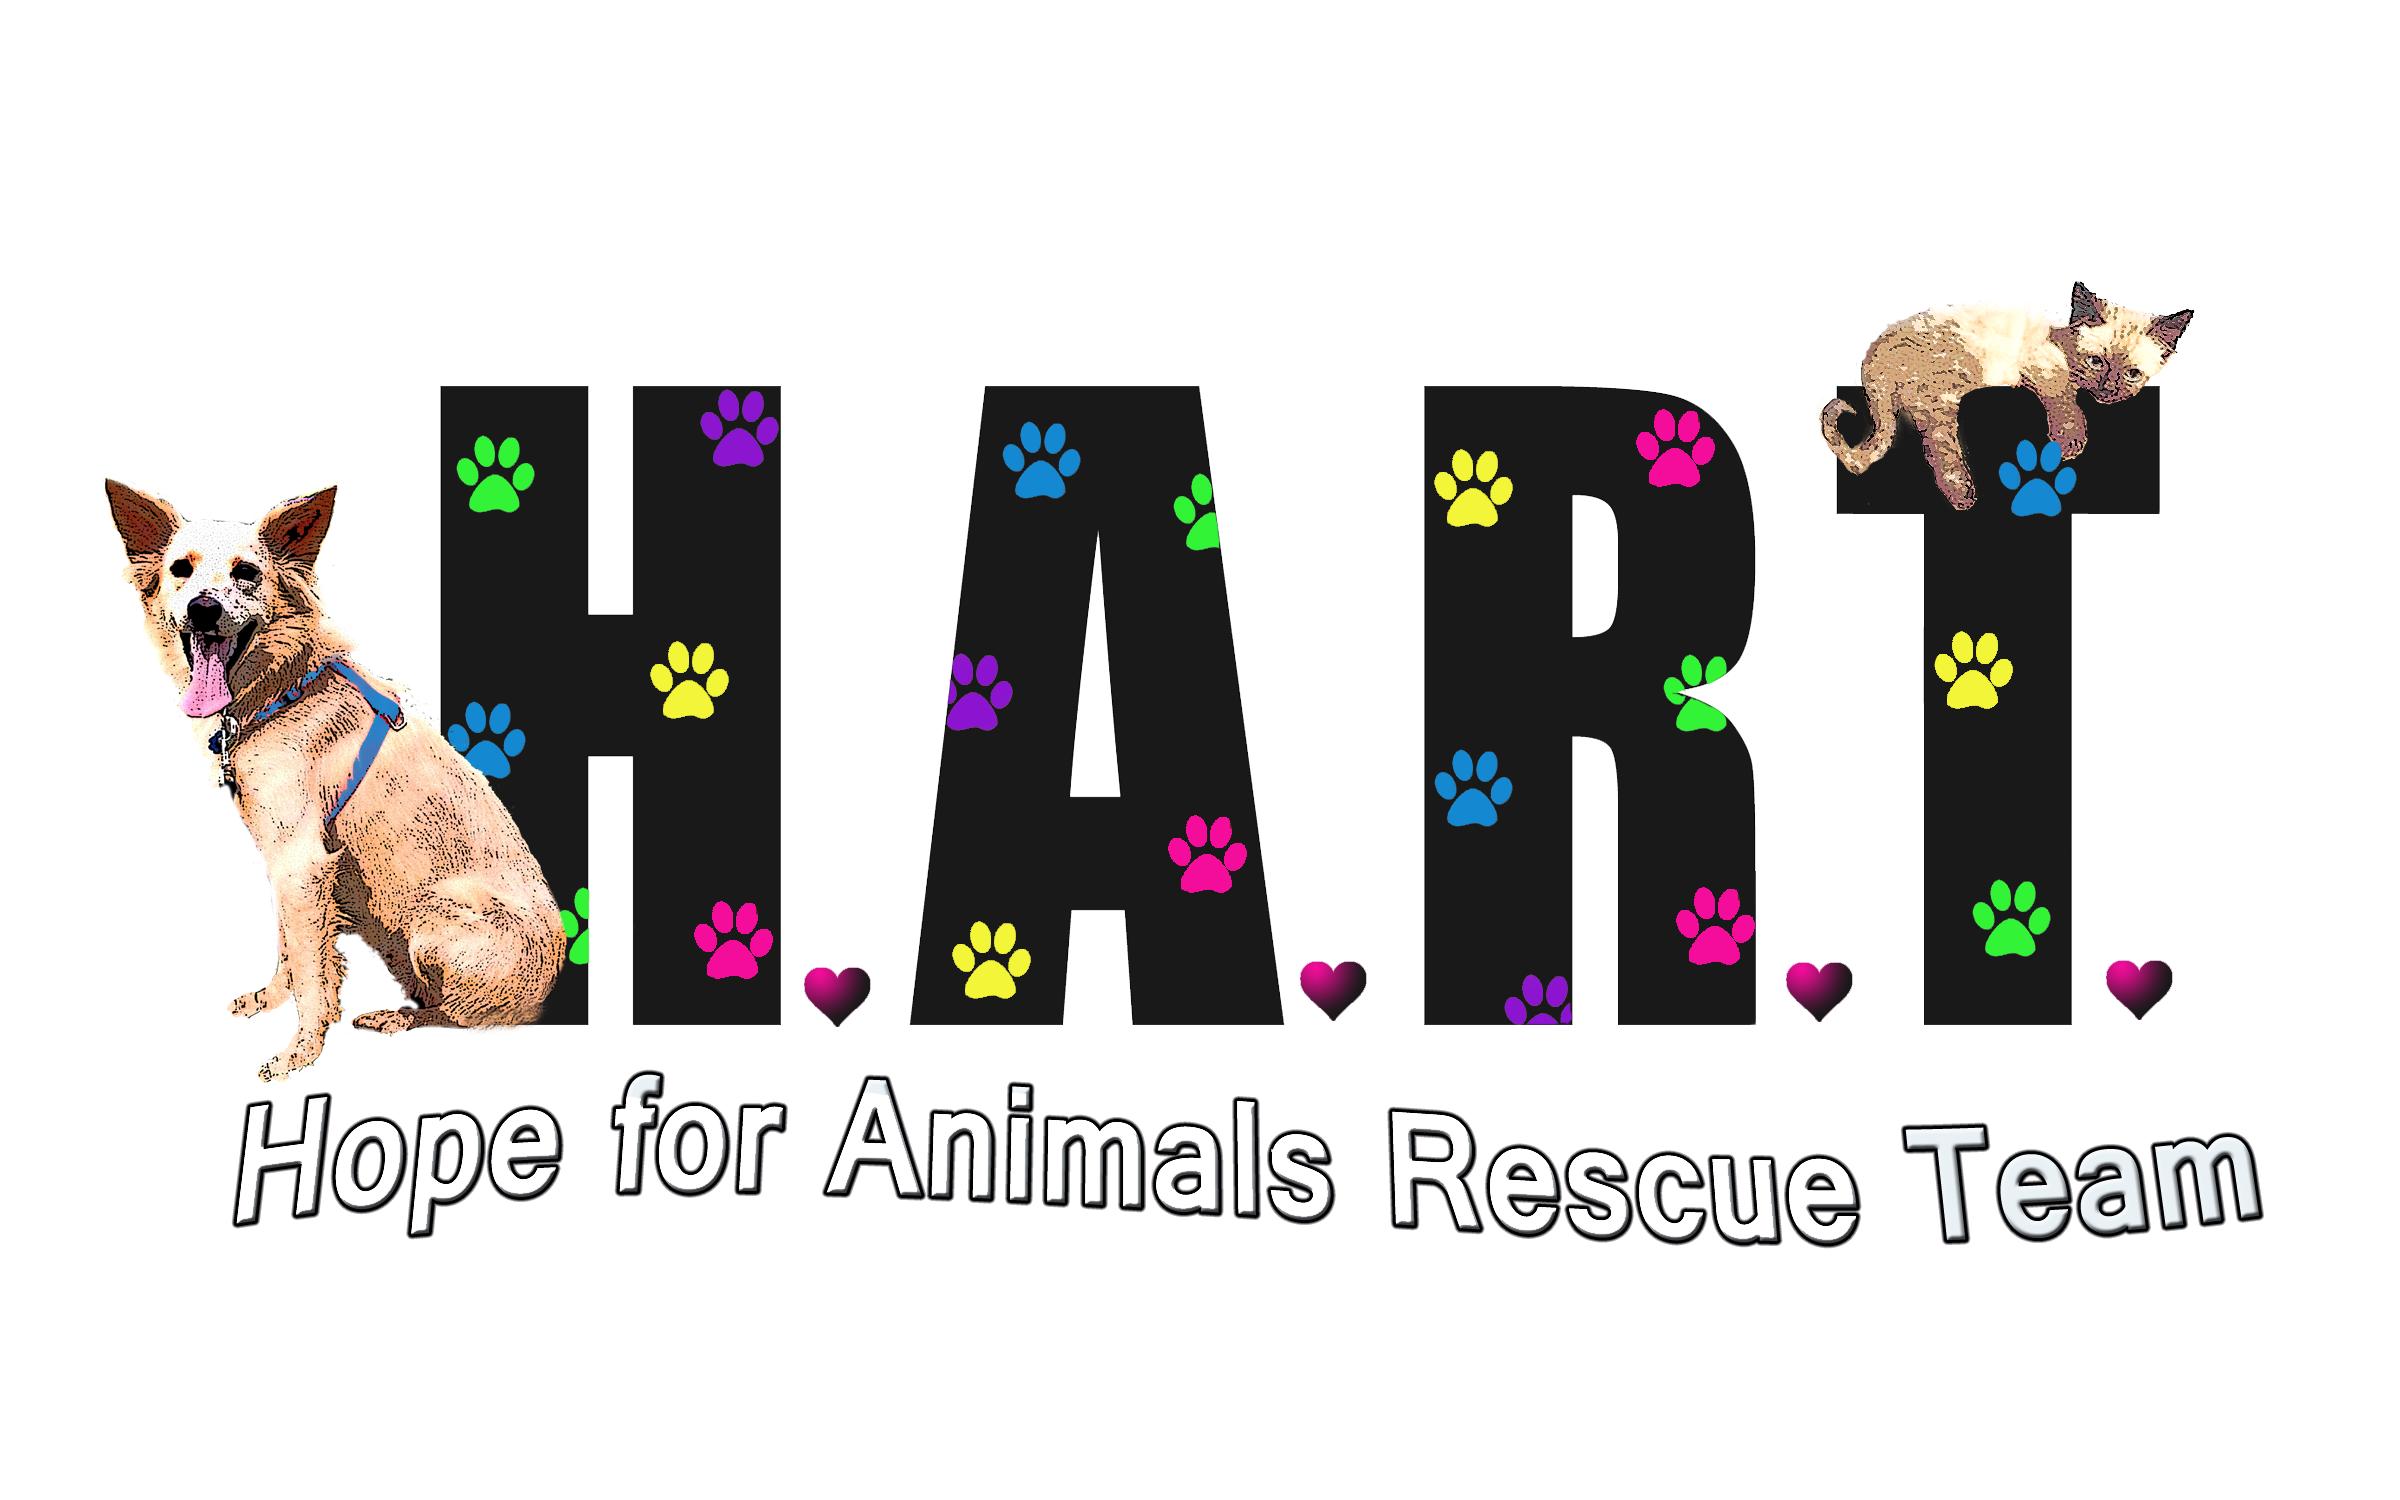 Hope for Animals Rescue Team